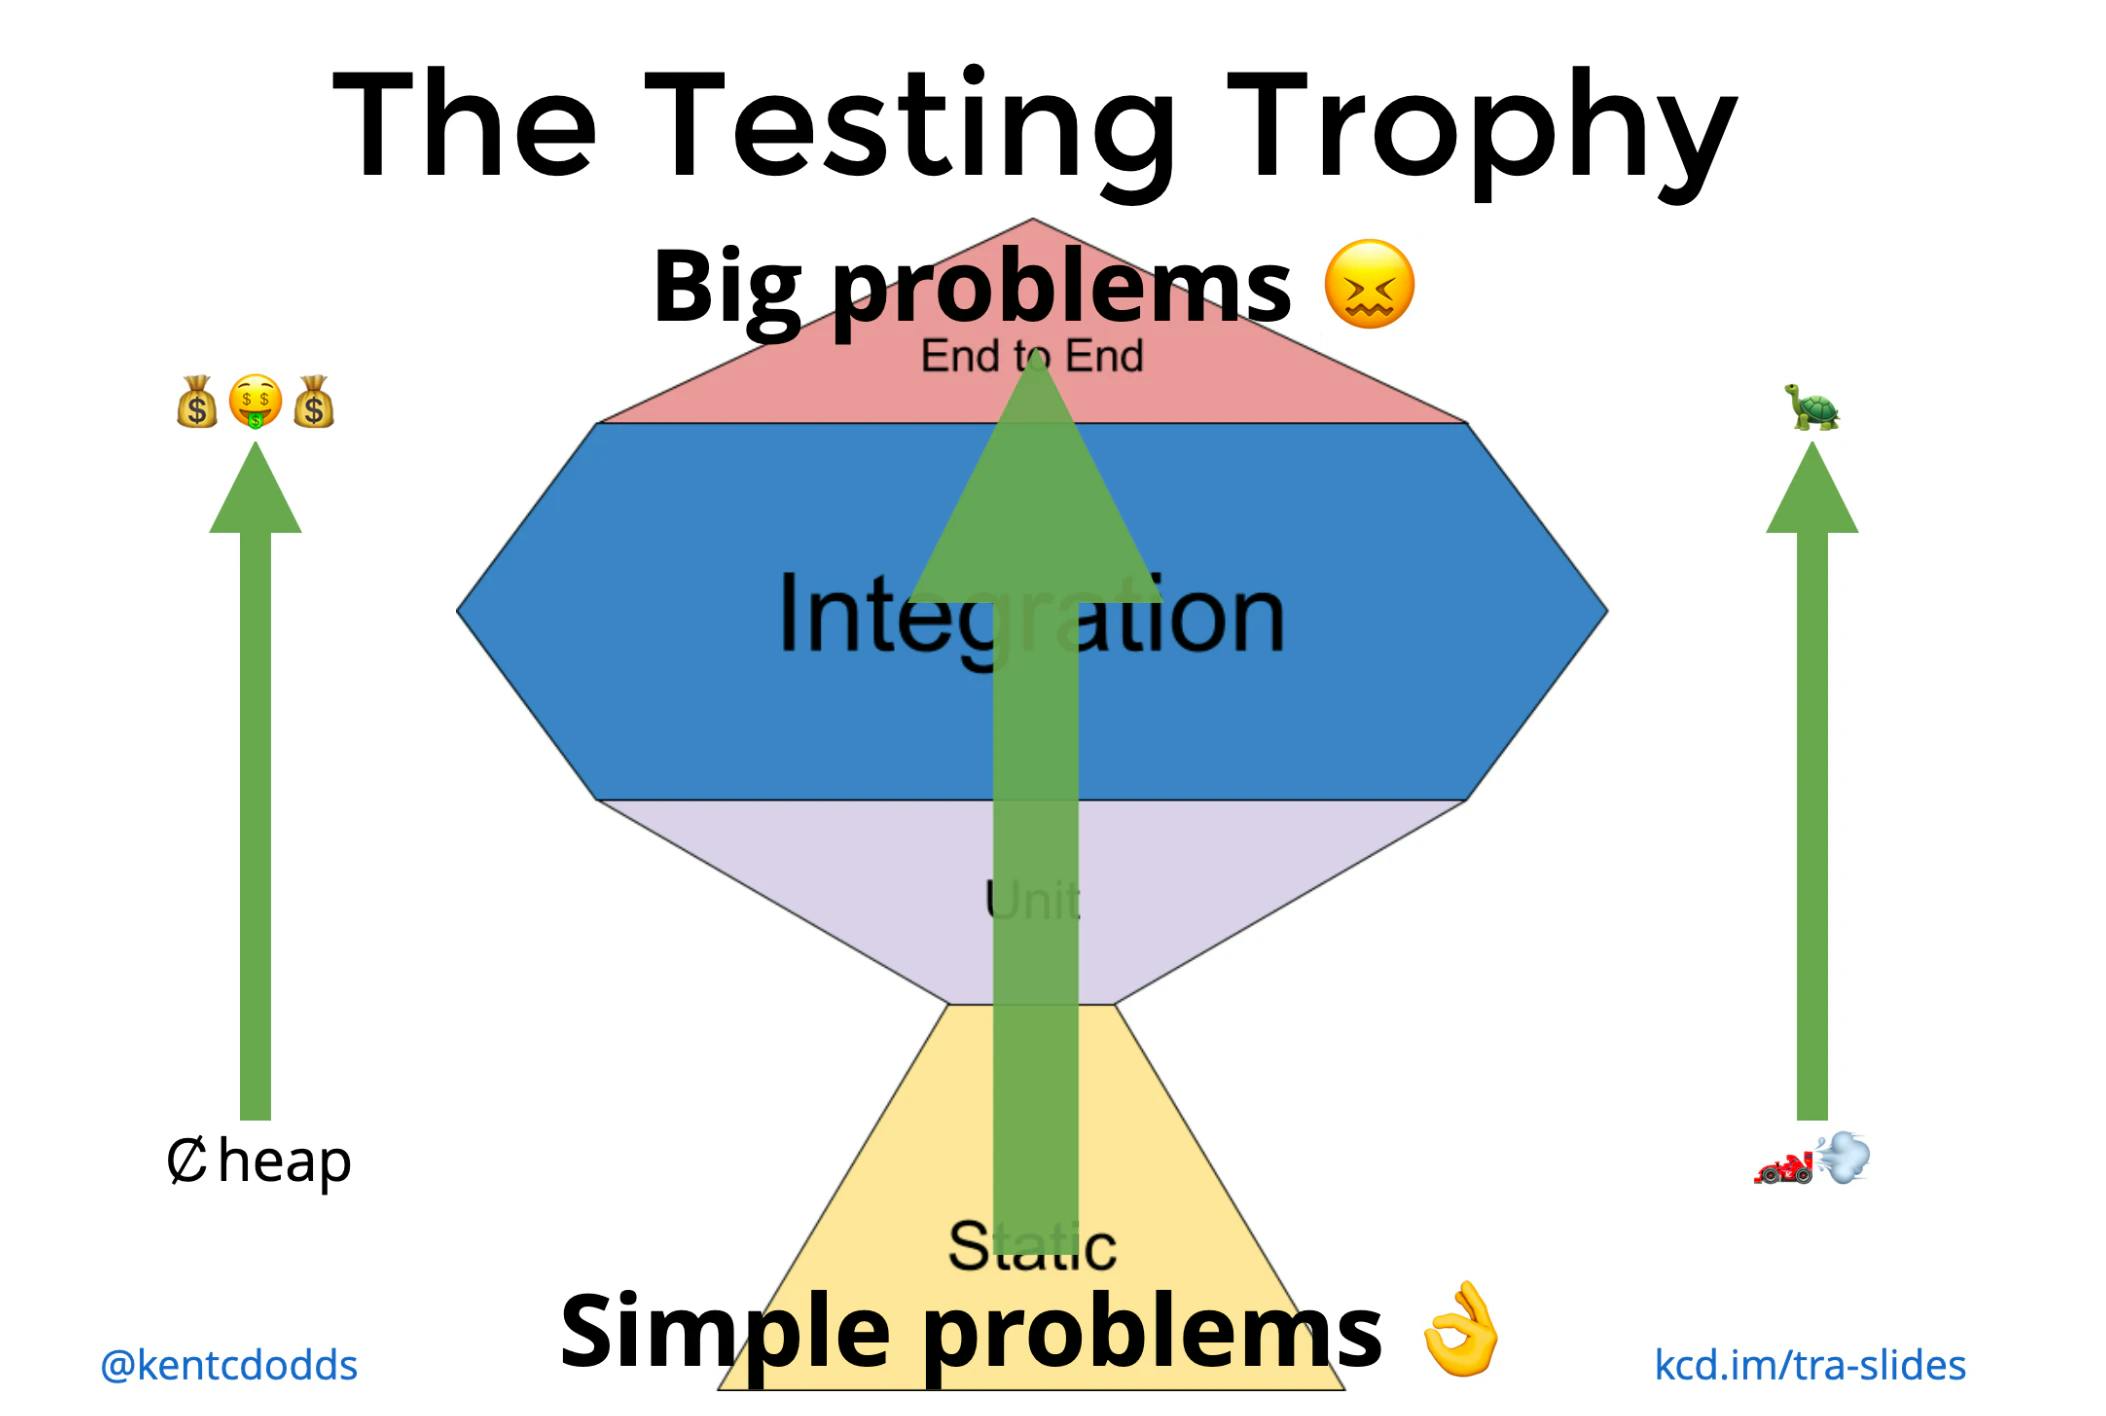 The testing trophy